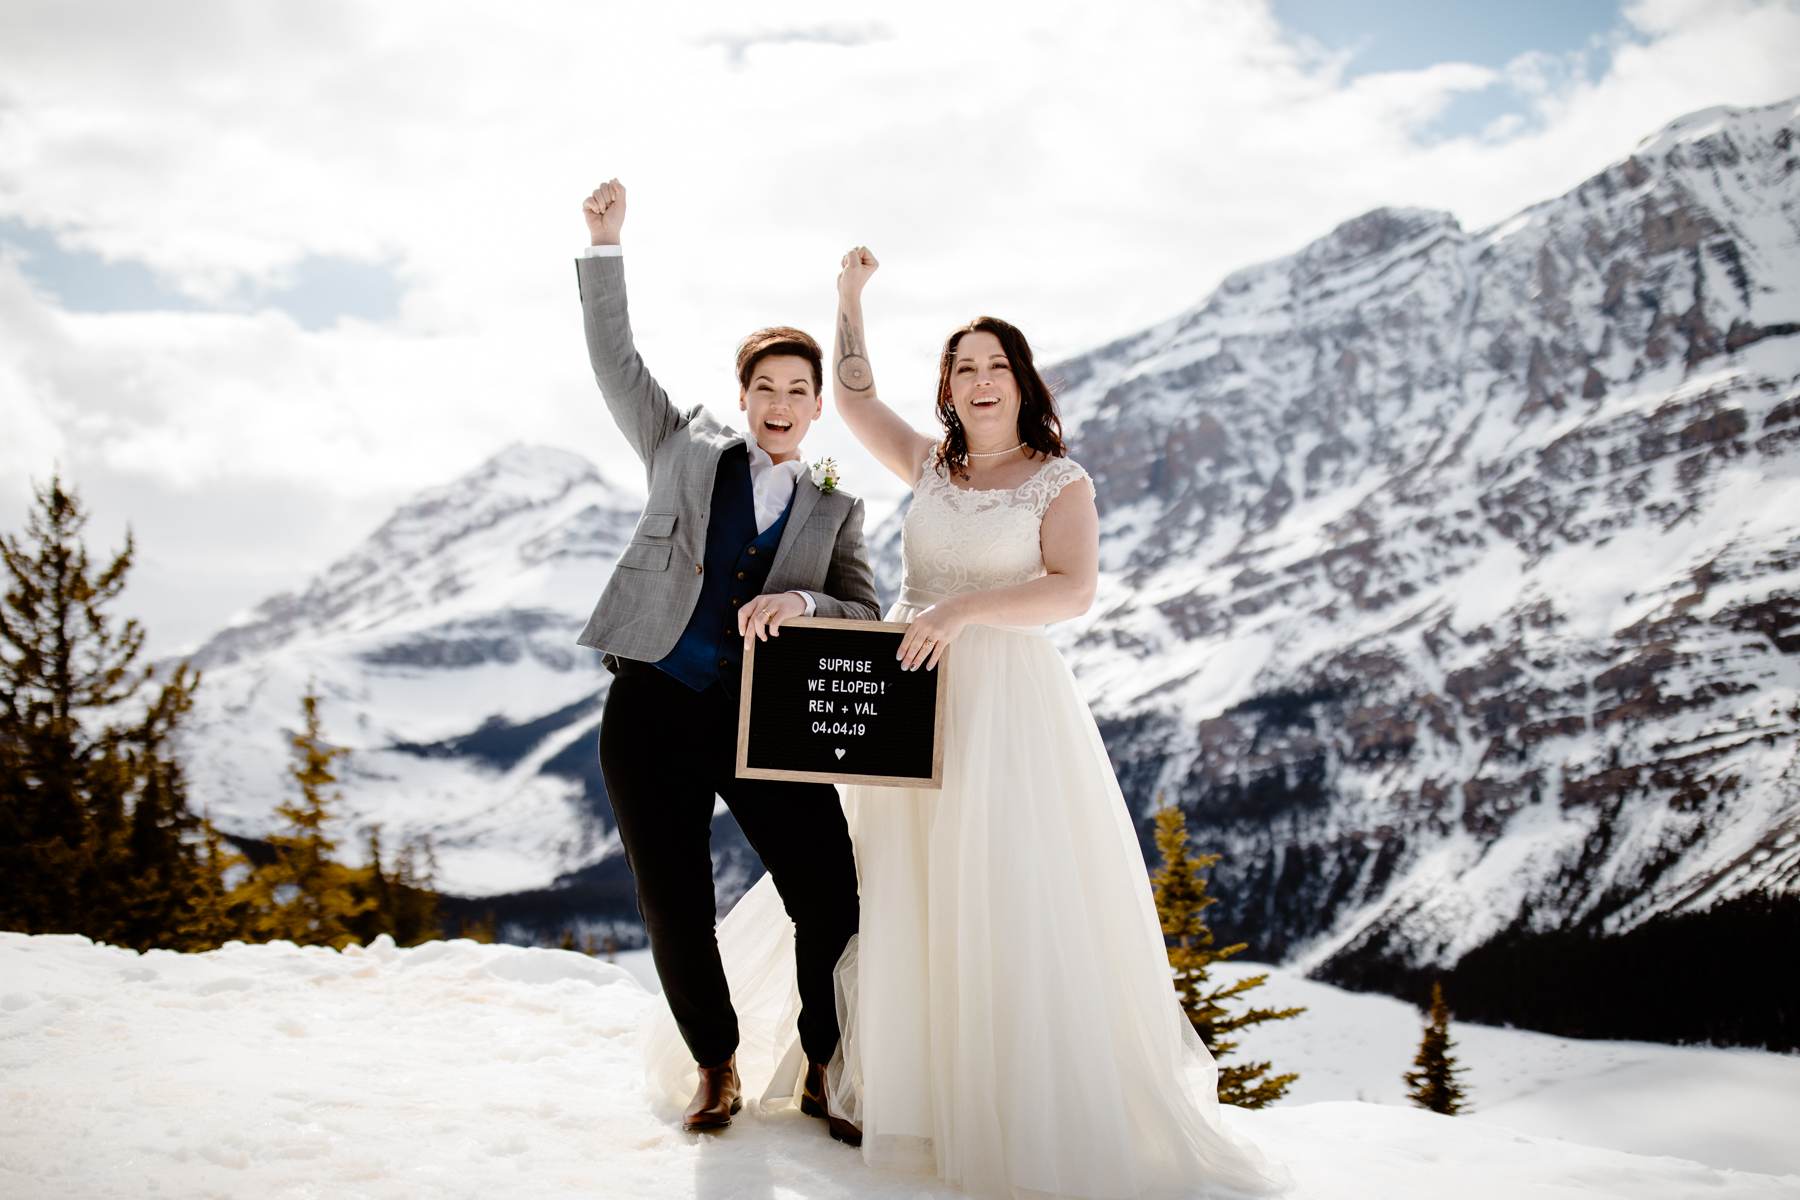 Banff National Park Elopement Photography with LGBTQ-friendly photographers - Image 11